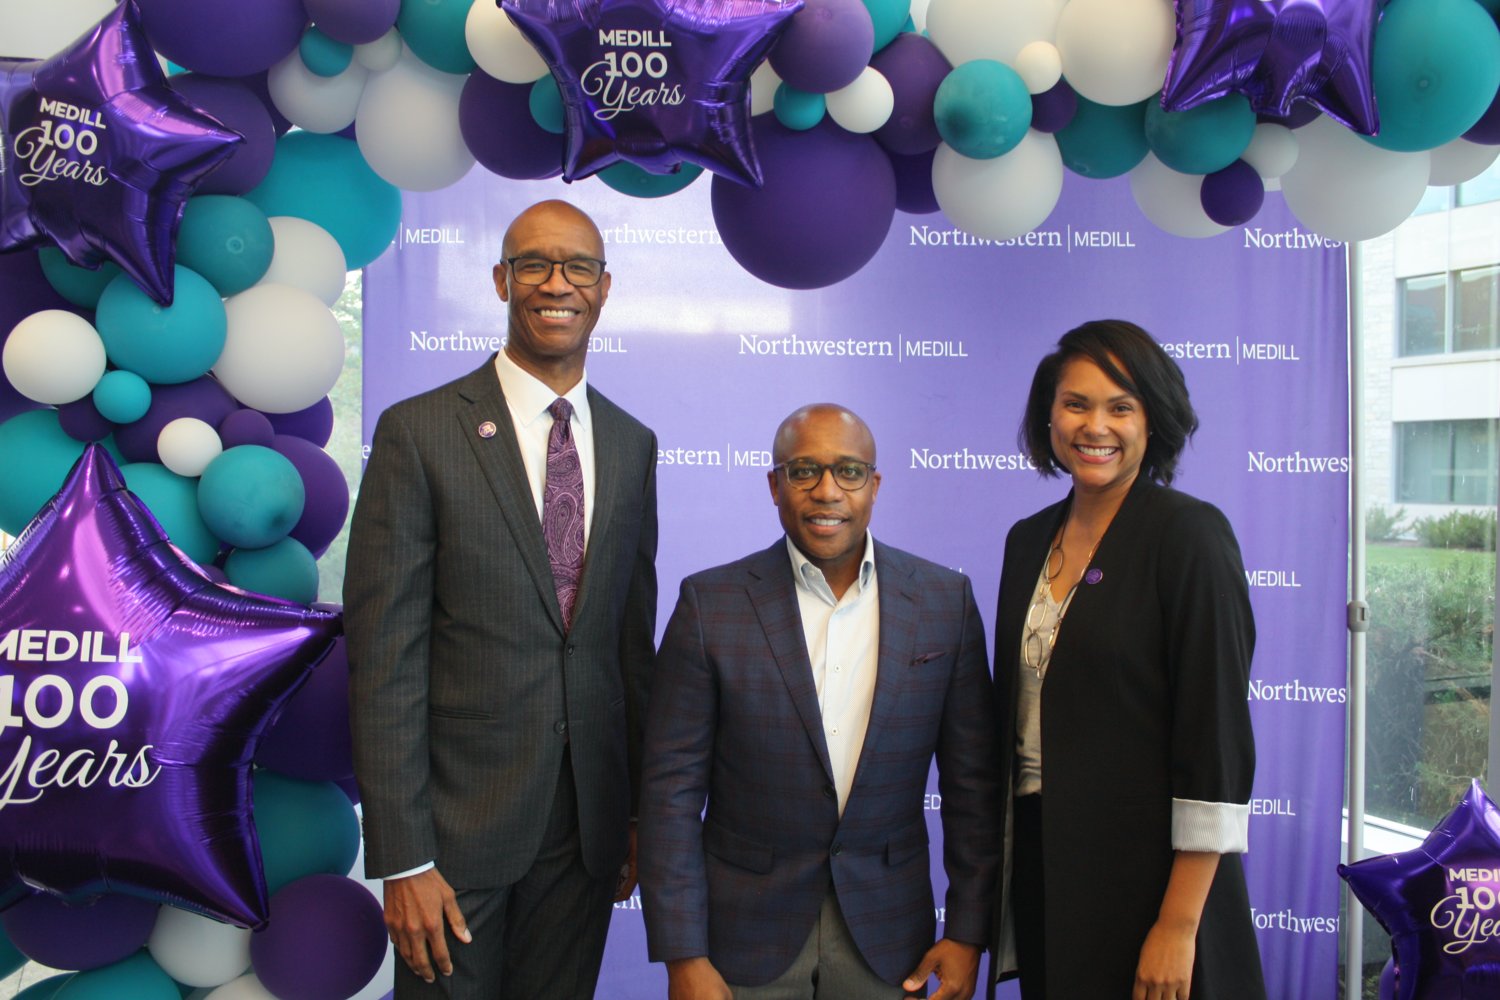 Medill Dean Charles Whitaker, Proctor & Gamble’s CCO Damon Jones, and Danielle Bell, an assistant professor at Medill, pose at a step-and-repeat. Jones was a guest speaker at Medill’s Centennial speaker series, and Bell led the discussion.